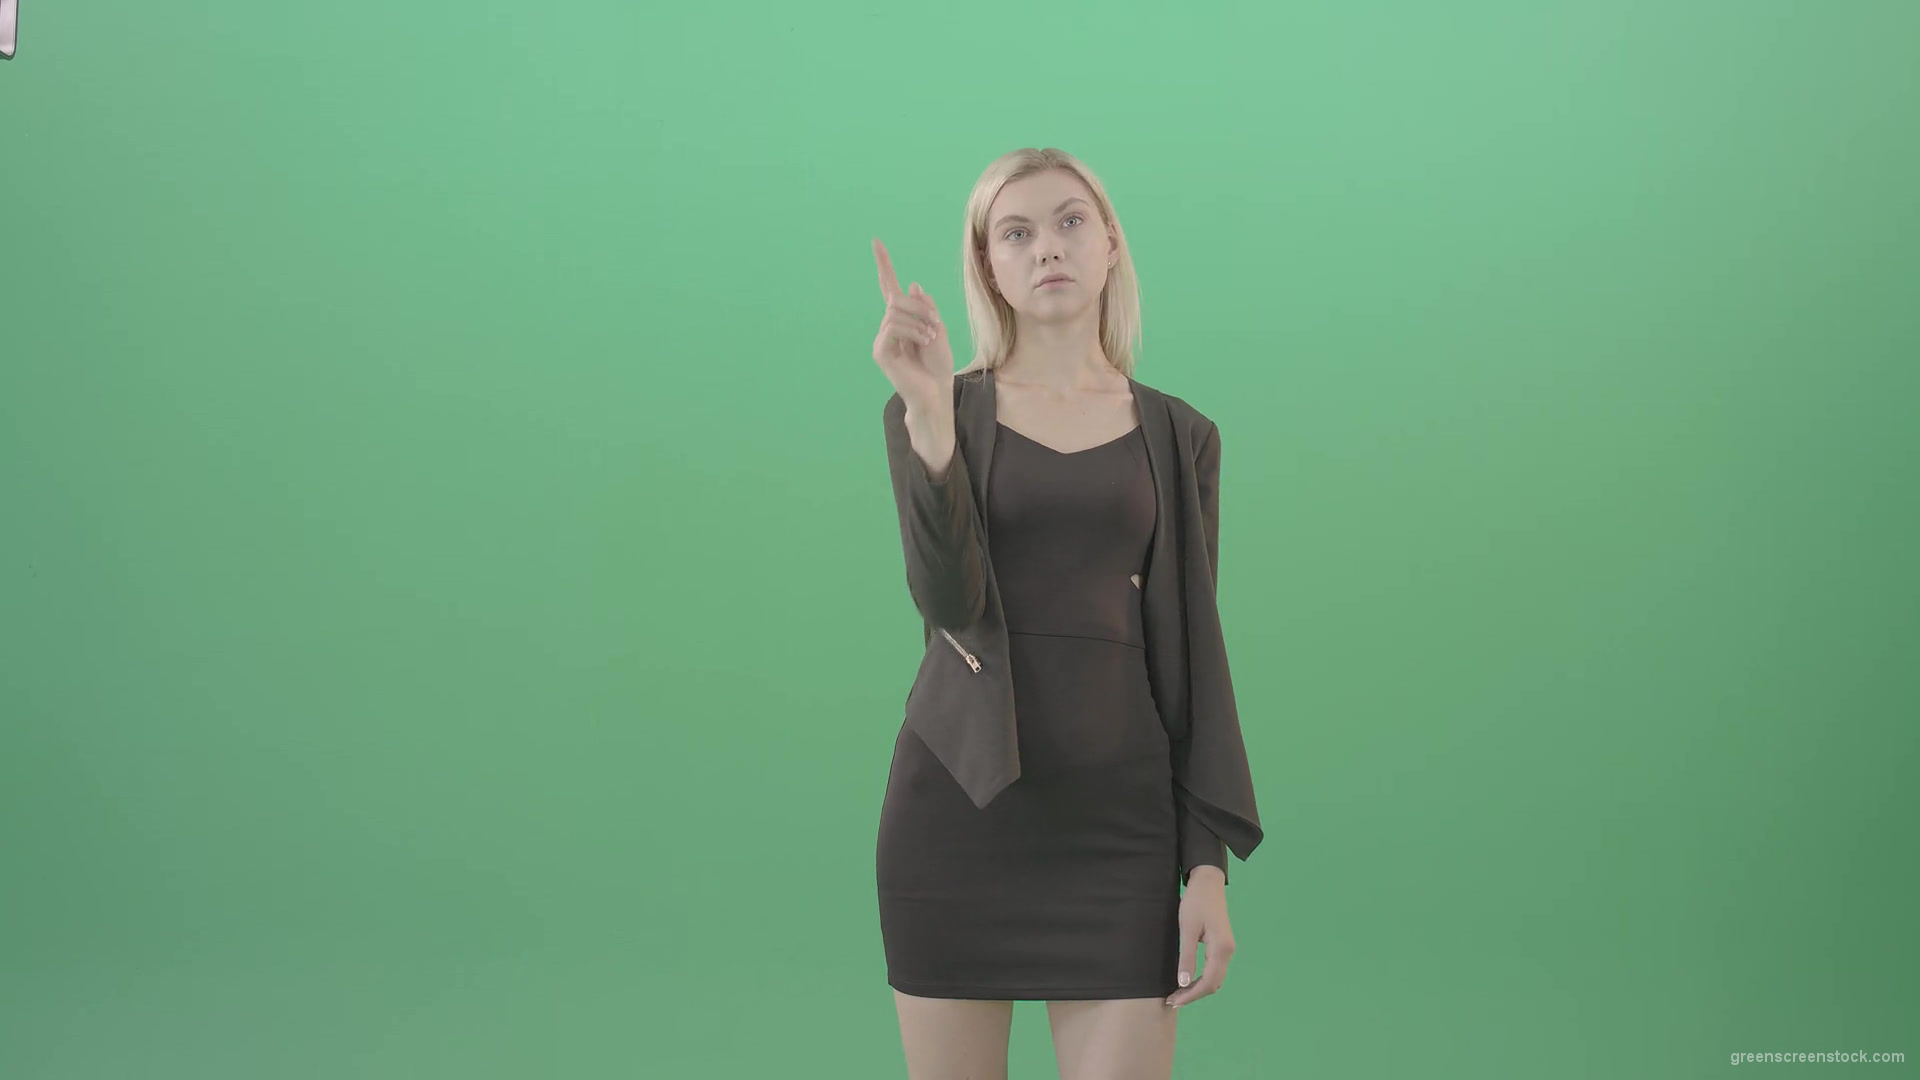 Girl-searching-in-internet-virtual-shopping-on-touch-screen-on-green-background-4K-Video-Footage-1920_004 Green Screen Stock